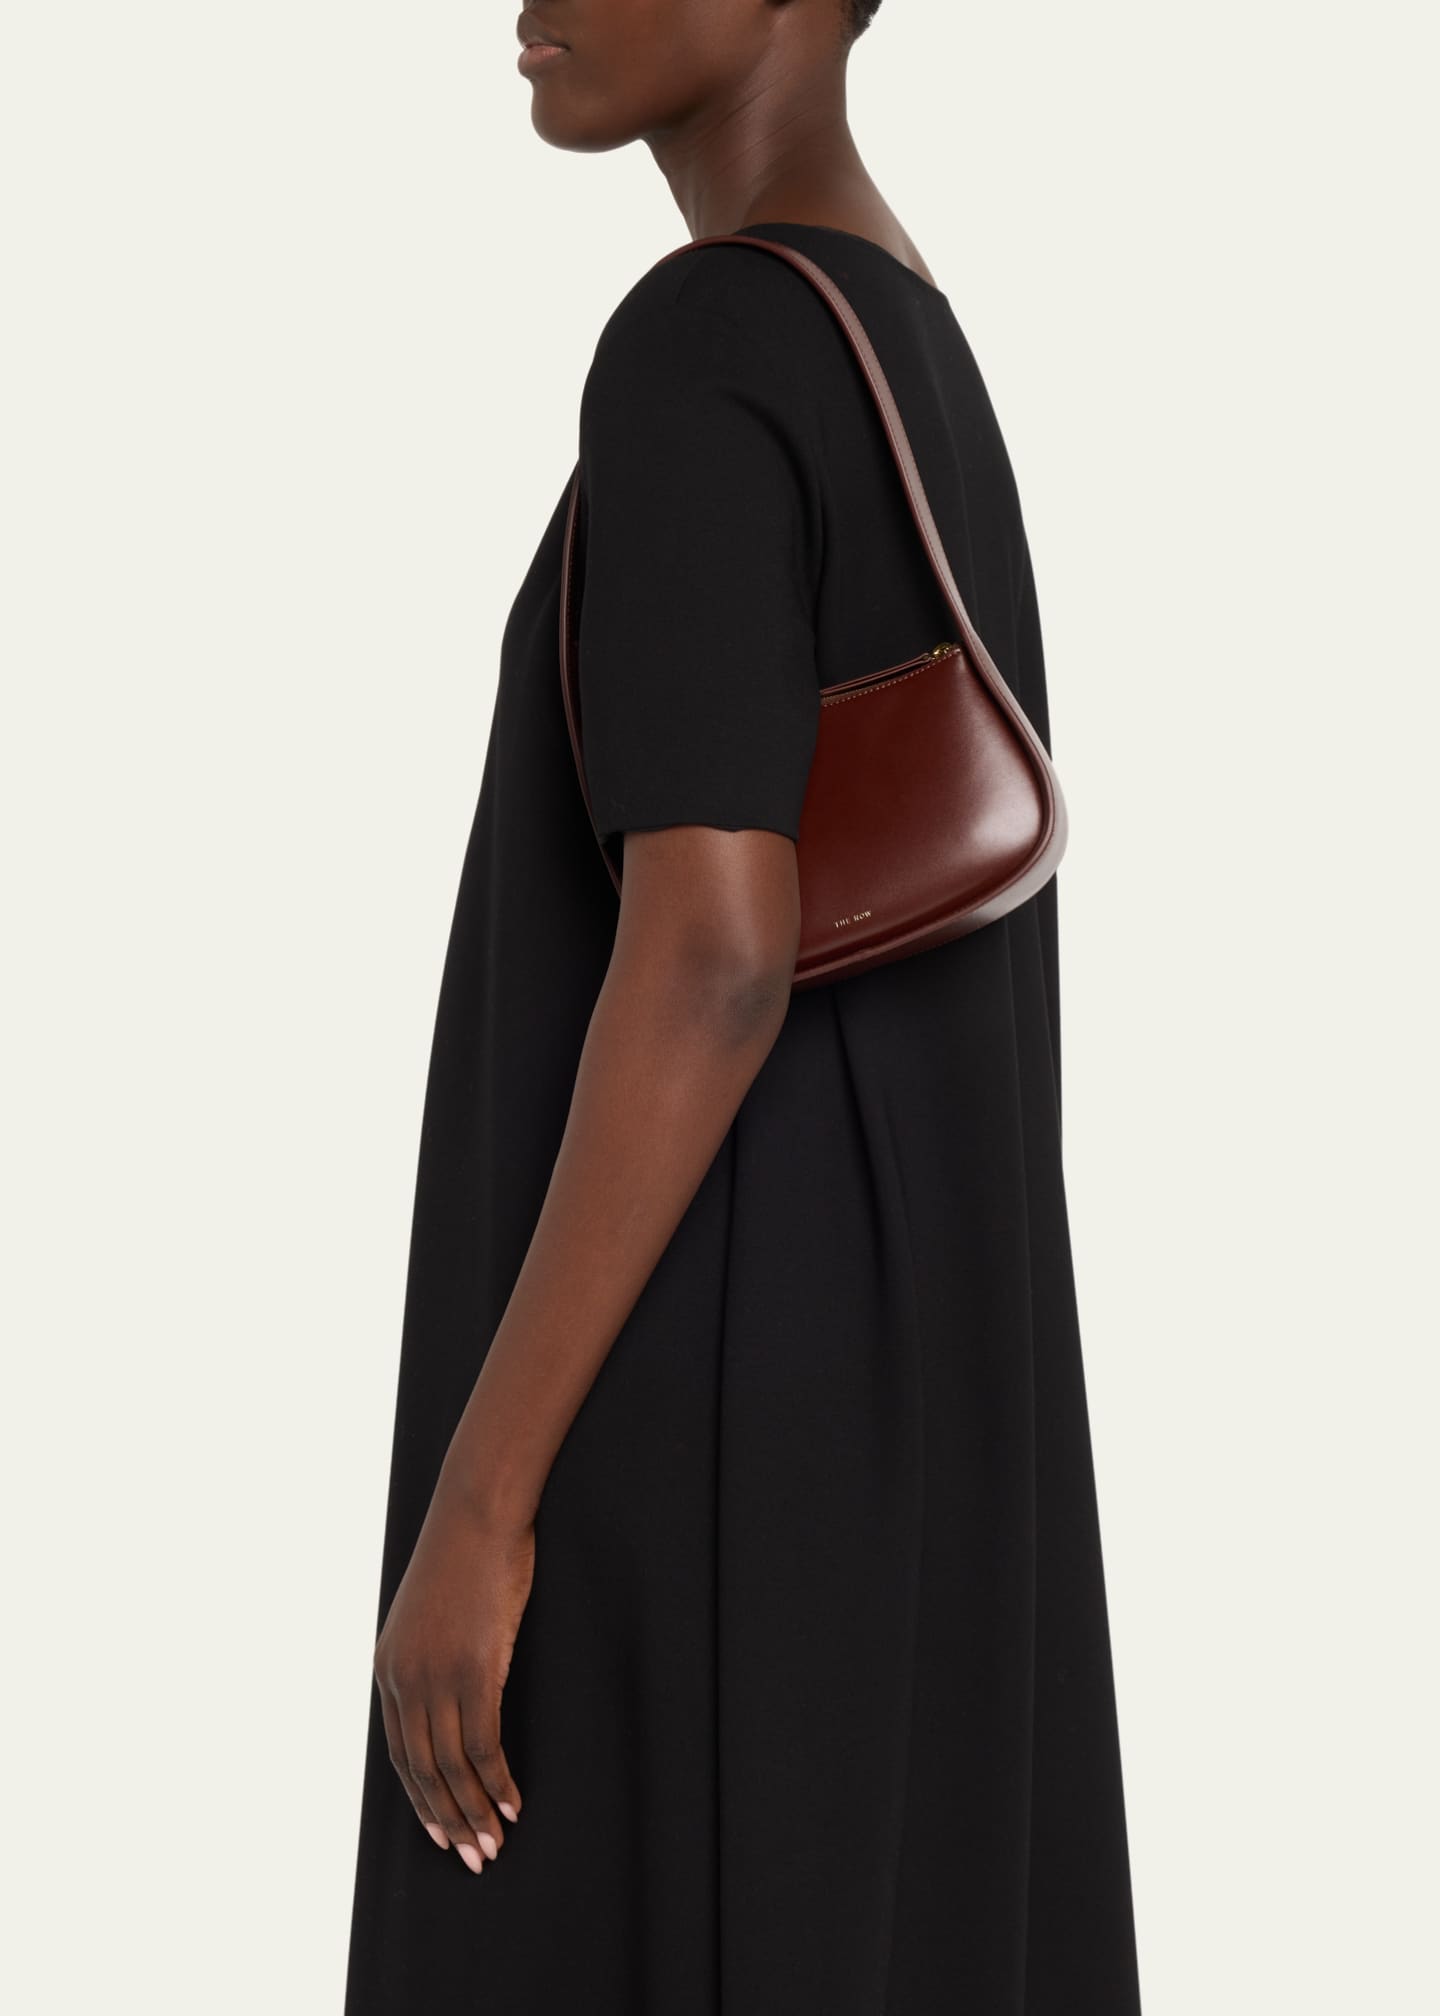 THE ROW Half Moon Shoulder Bag in Leather